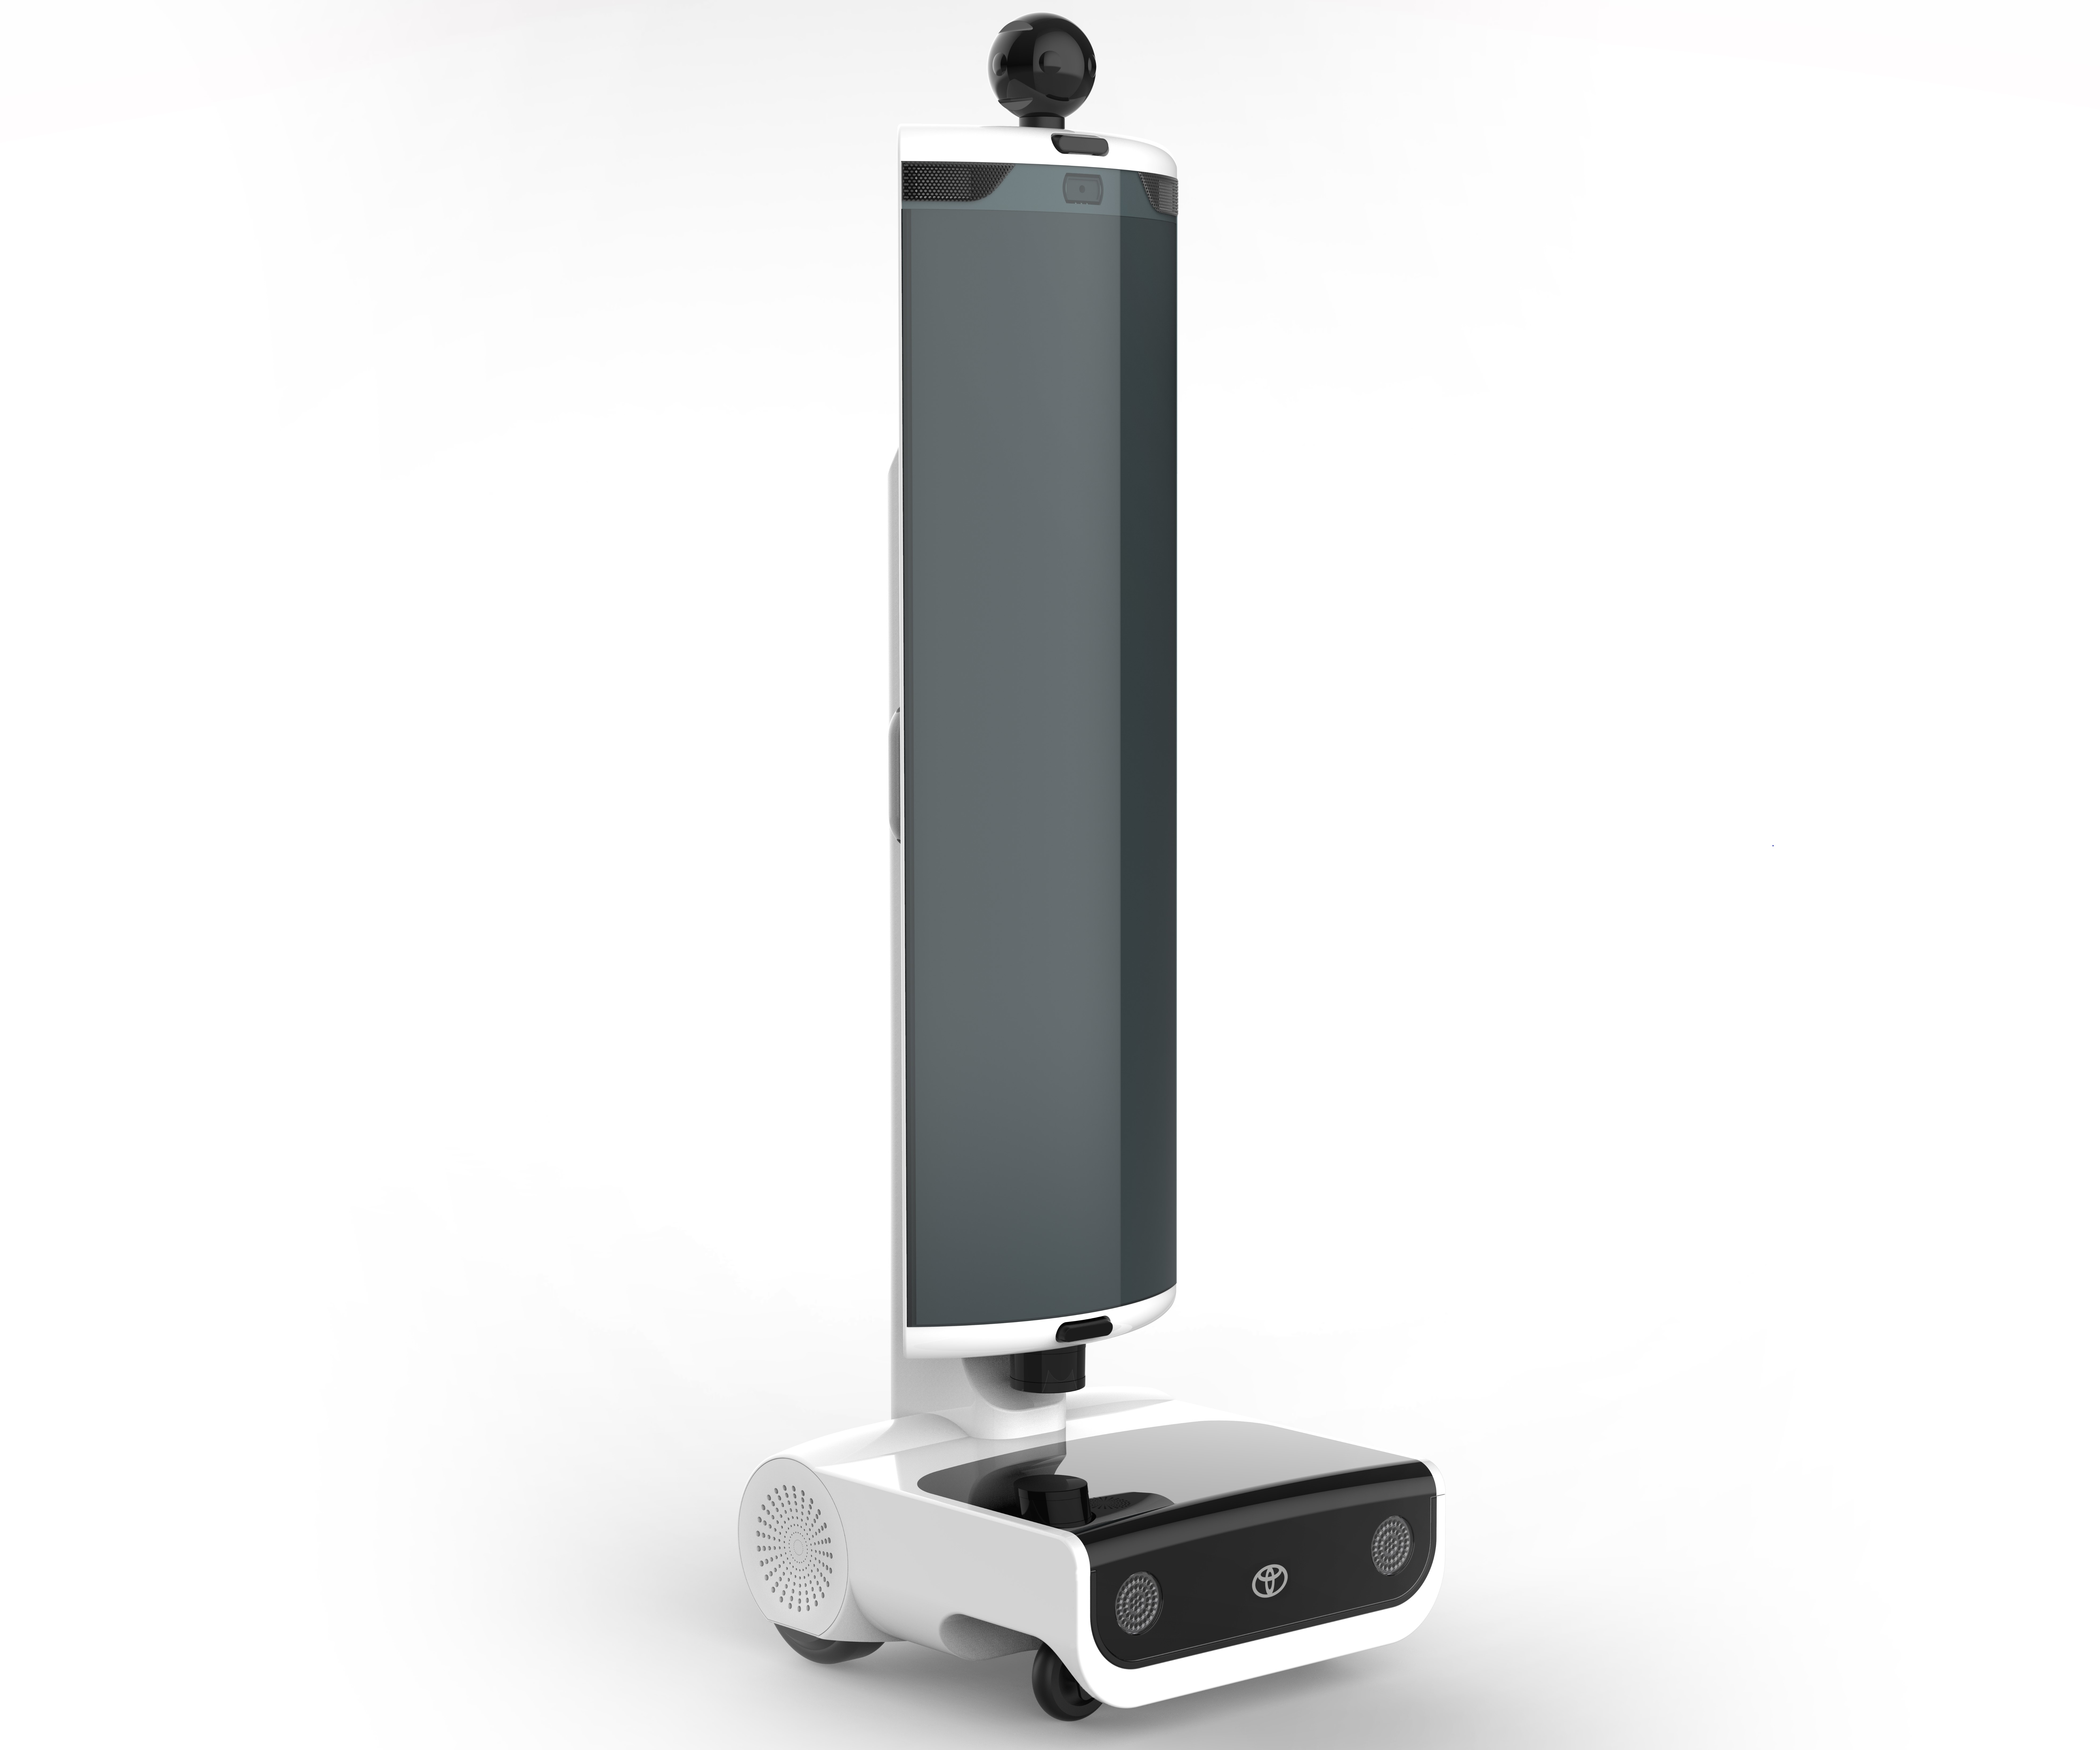 Toyota Introduces TRI's T-TR1, a Virtual Mobility/Tele-Presence Robot